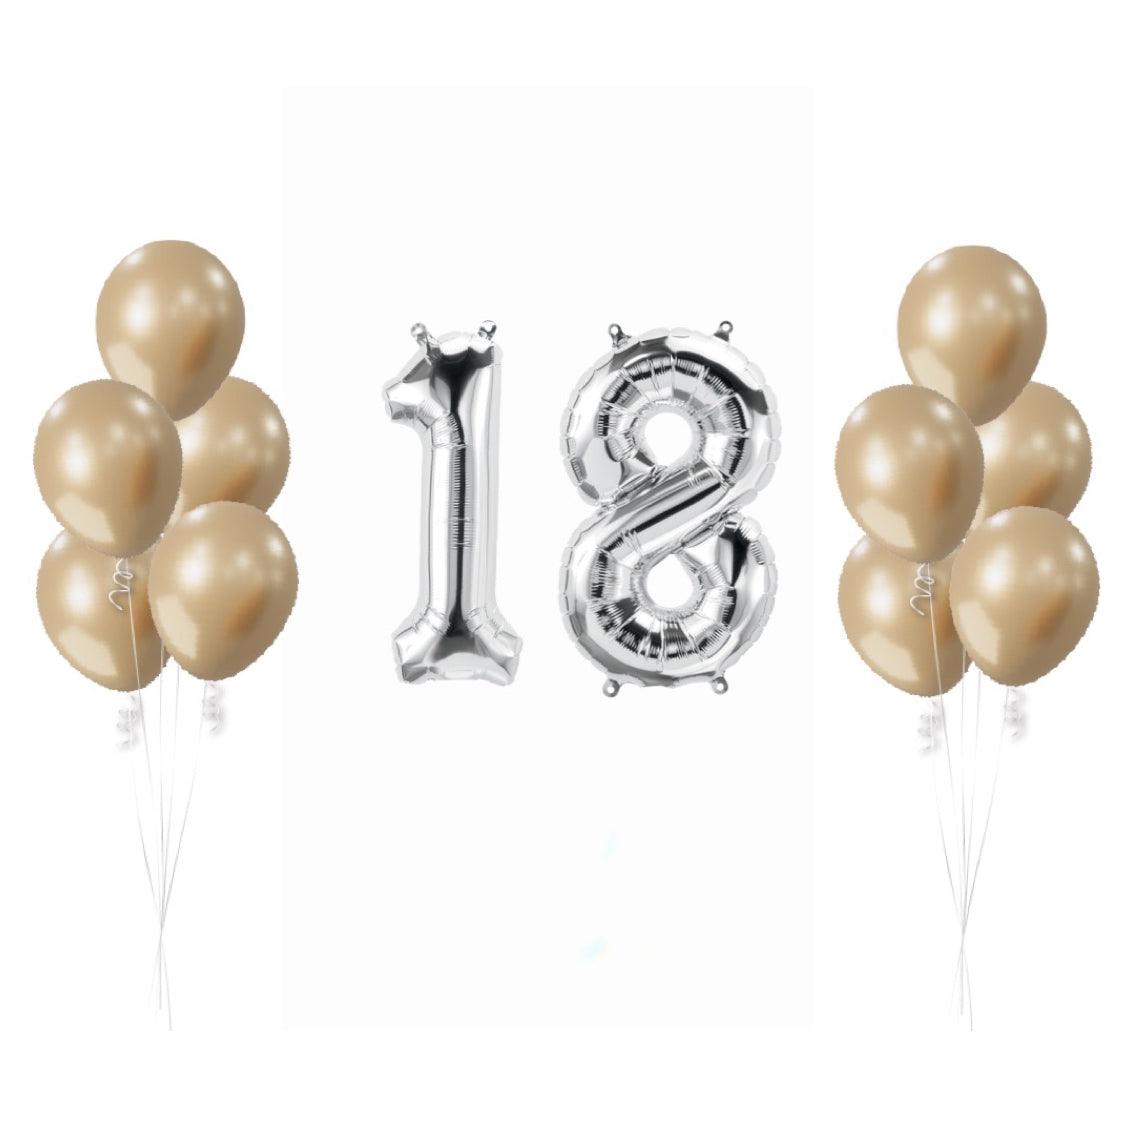 Everyone’s favourite birthday balloon bouquet set (chrome gold) - ONE UP BALLOONS